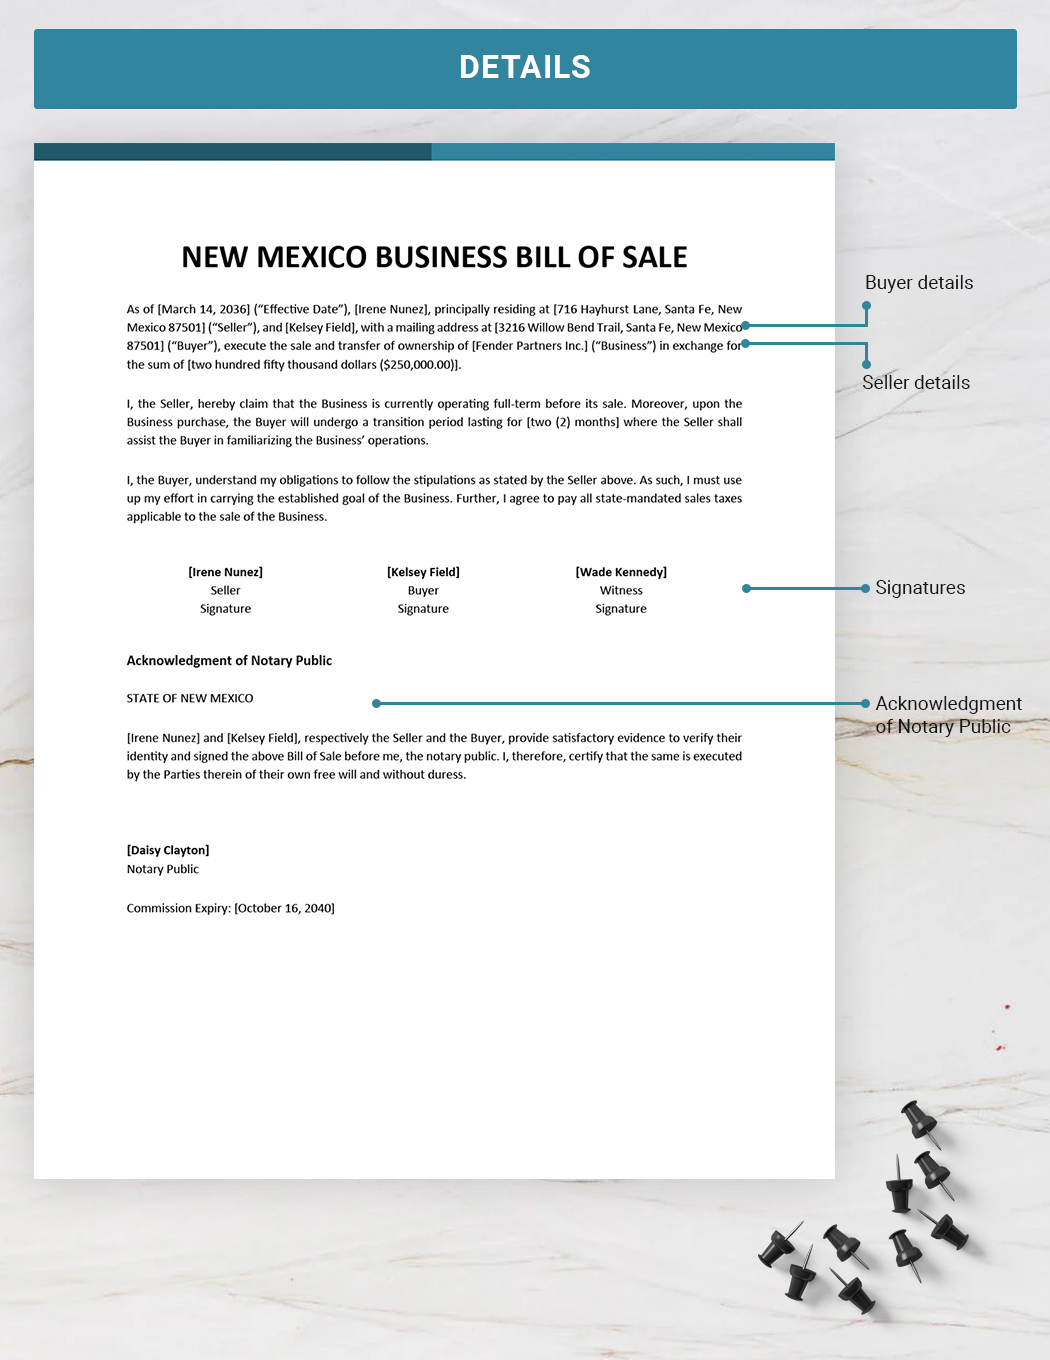 New Mexico Business Bill of Sale Template